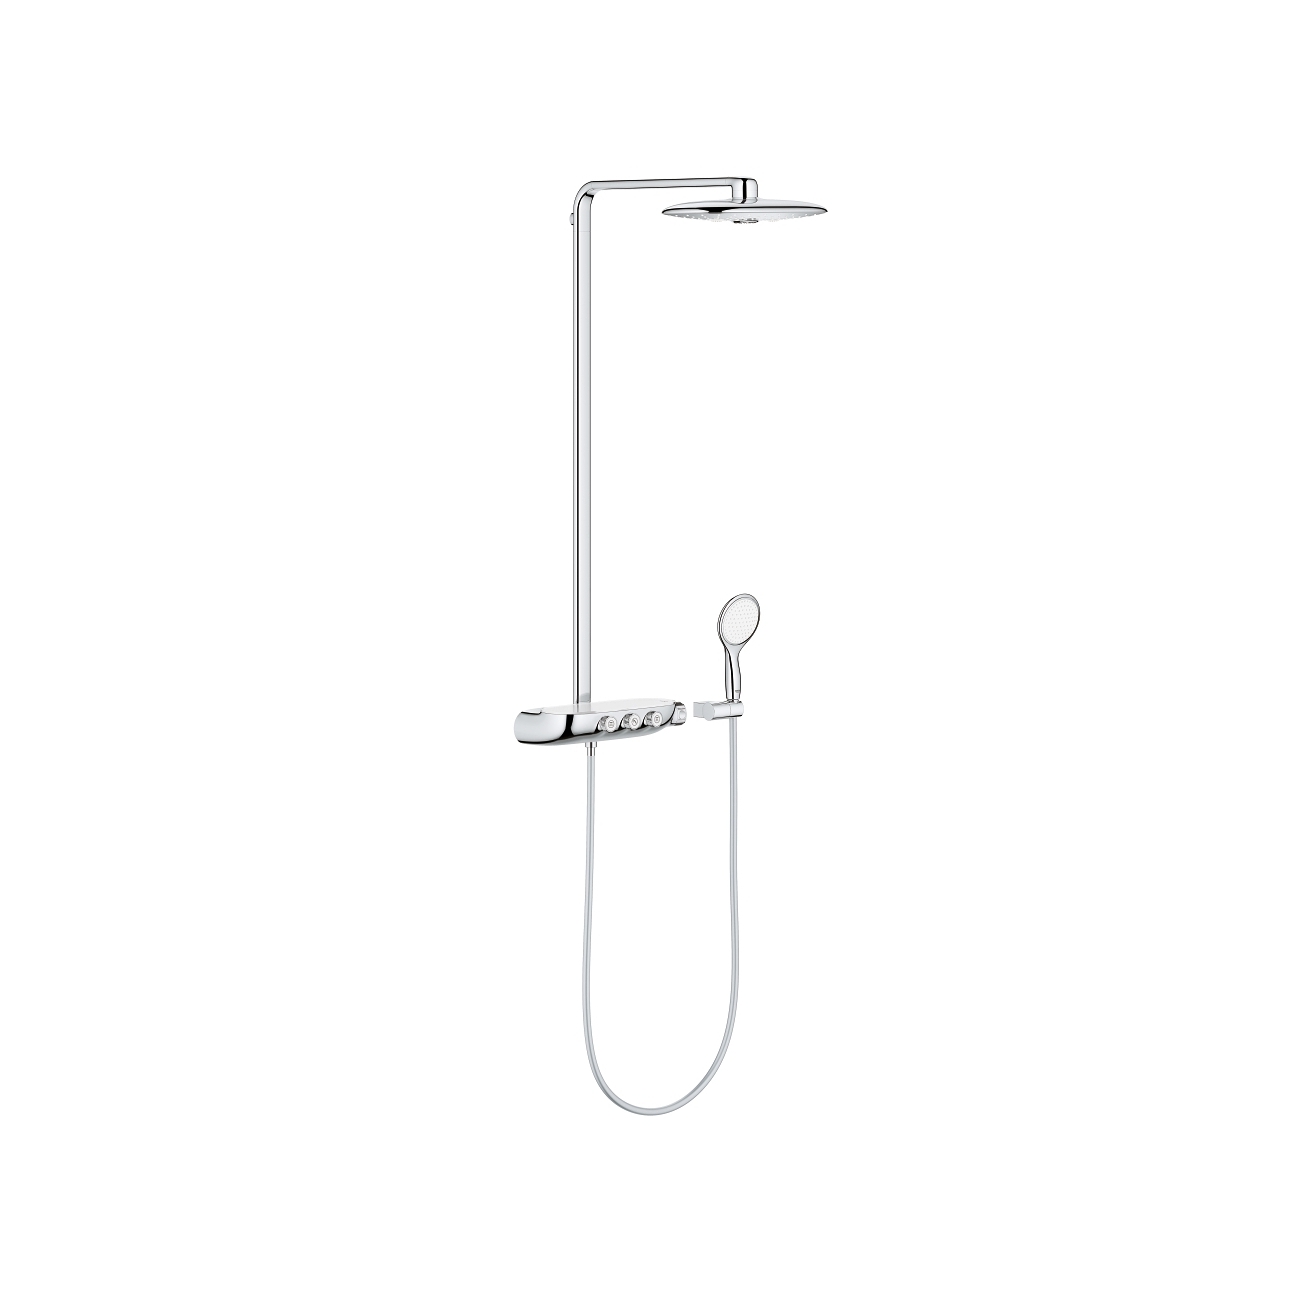 GROHE RAINSHOWER SYSTEM WITH THERMOSTAT